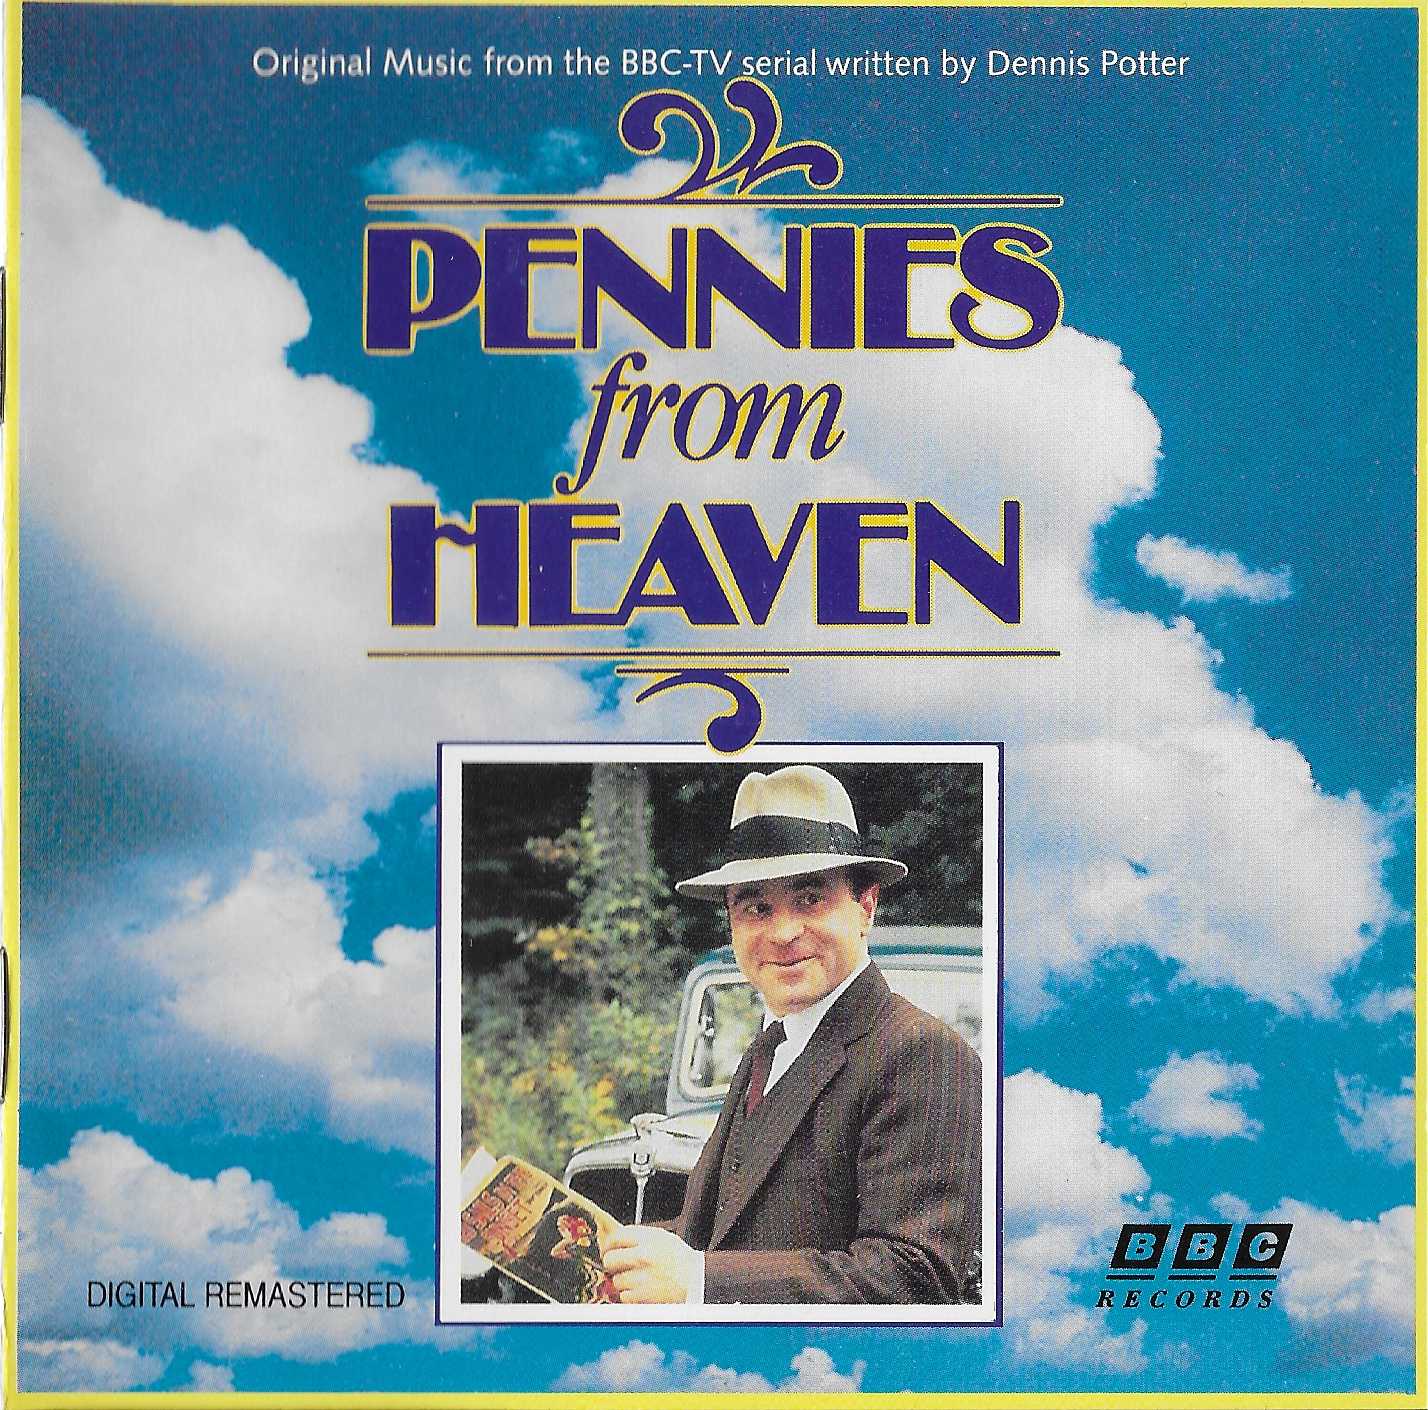 Picture of BBCCD7791 Pennies from Heaven (Dutch import) by artist Various from the BBC cds - Records and Tapes library